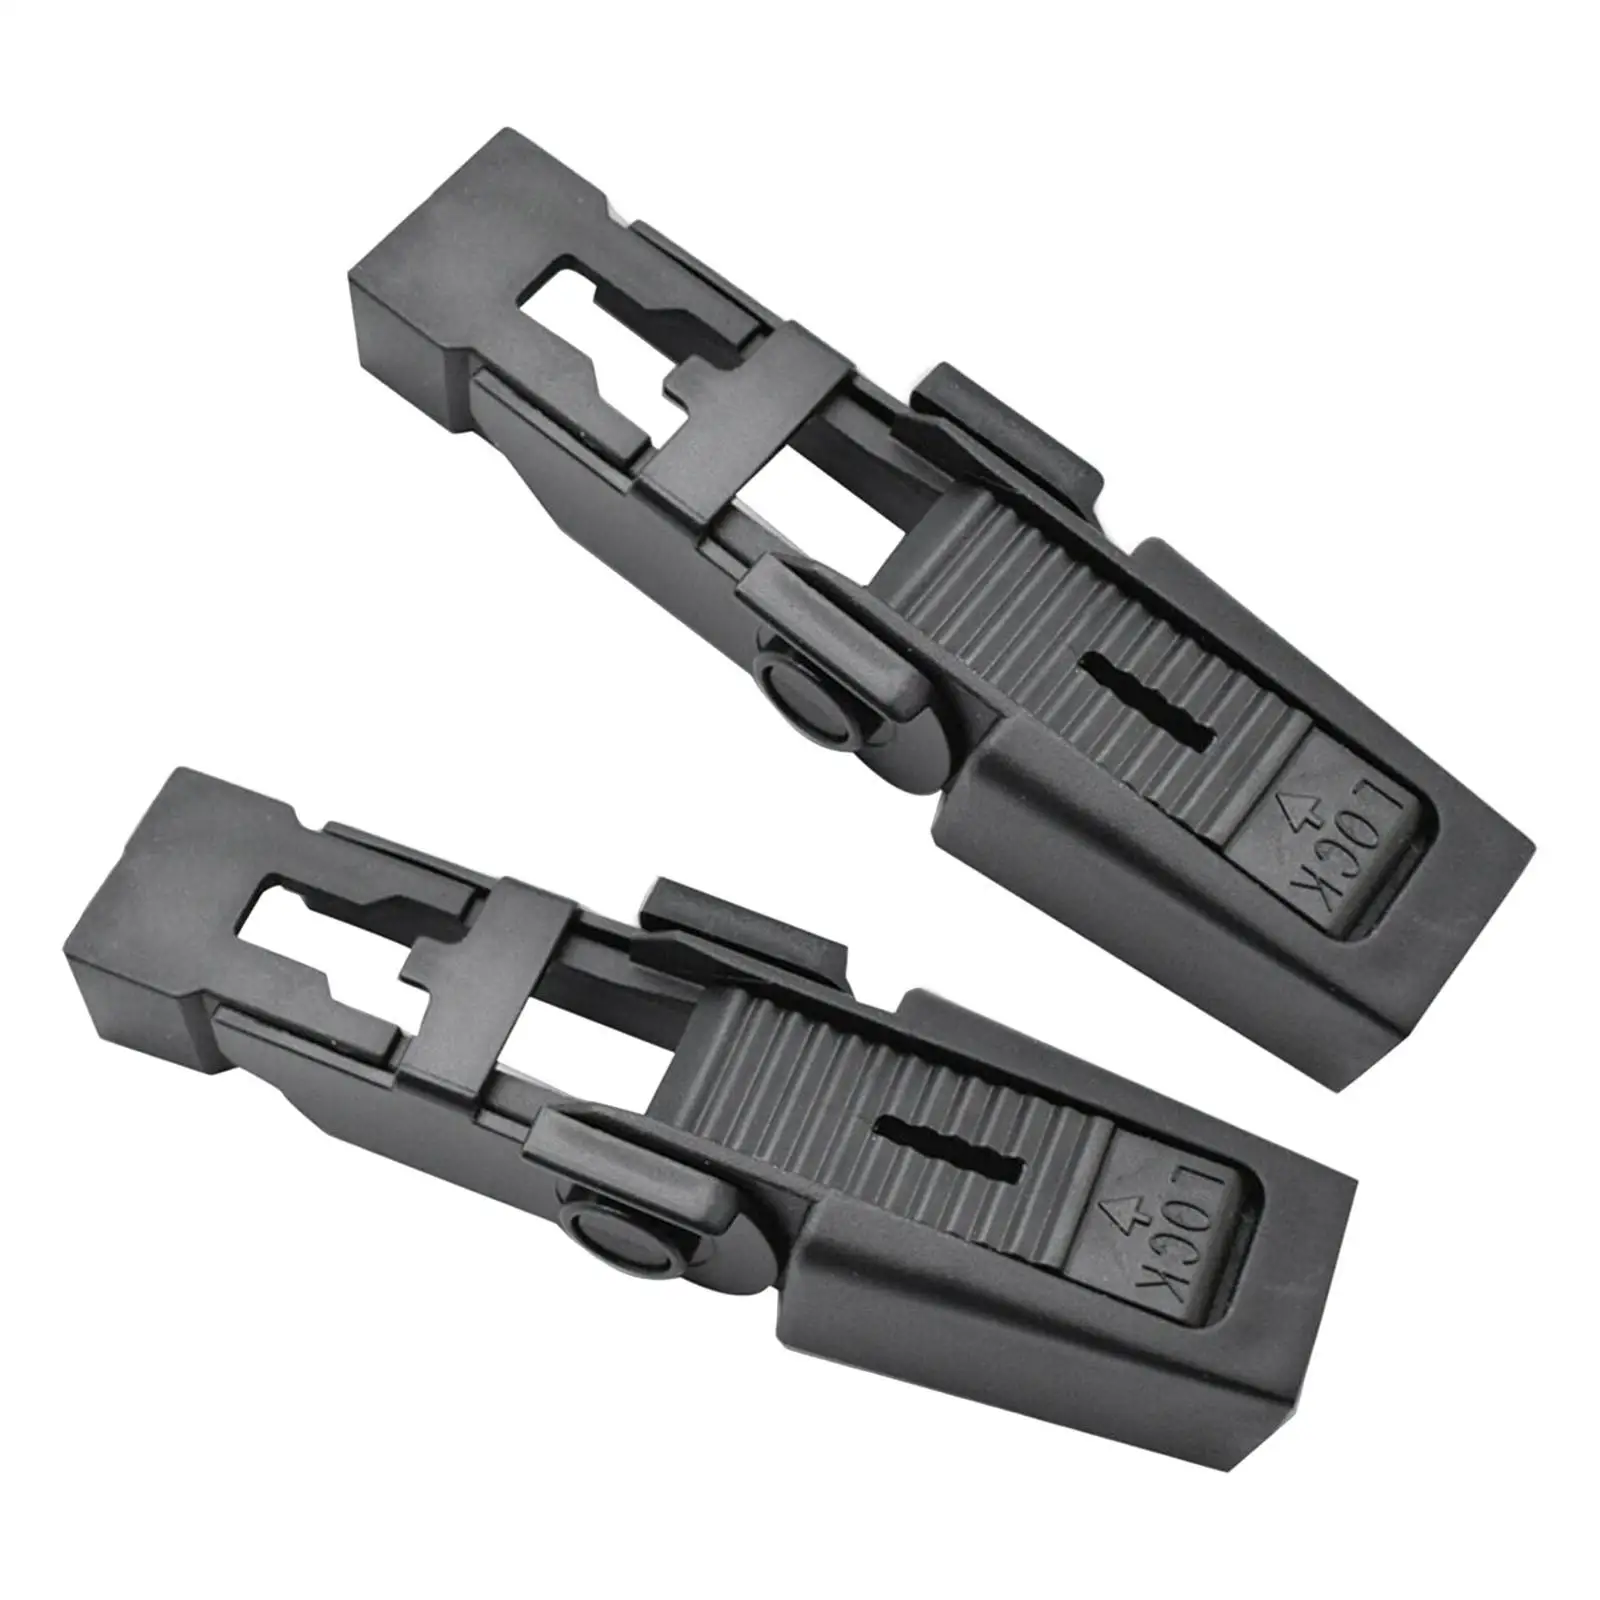 2x Auto Front Windshield Wiper Clip Dkw100020 Black for Discovery 2 L322 Replace Parts High Quality